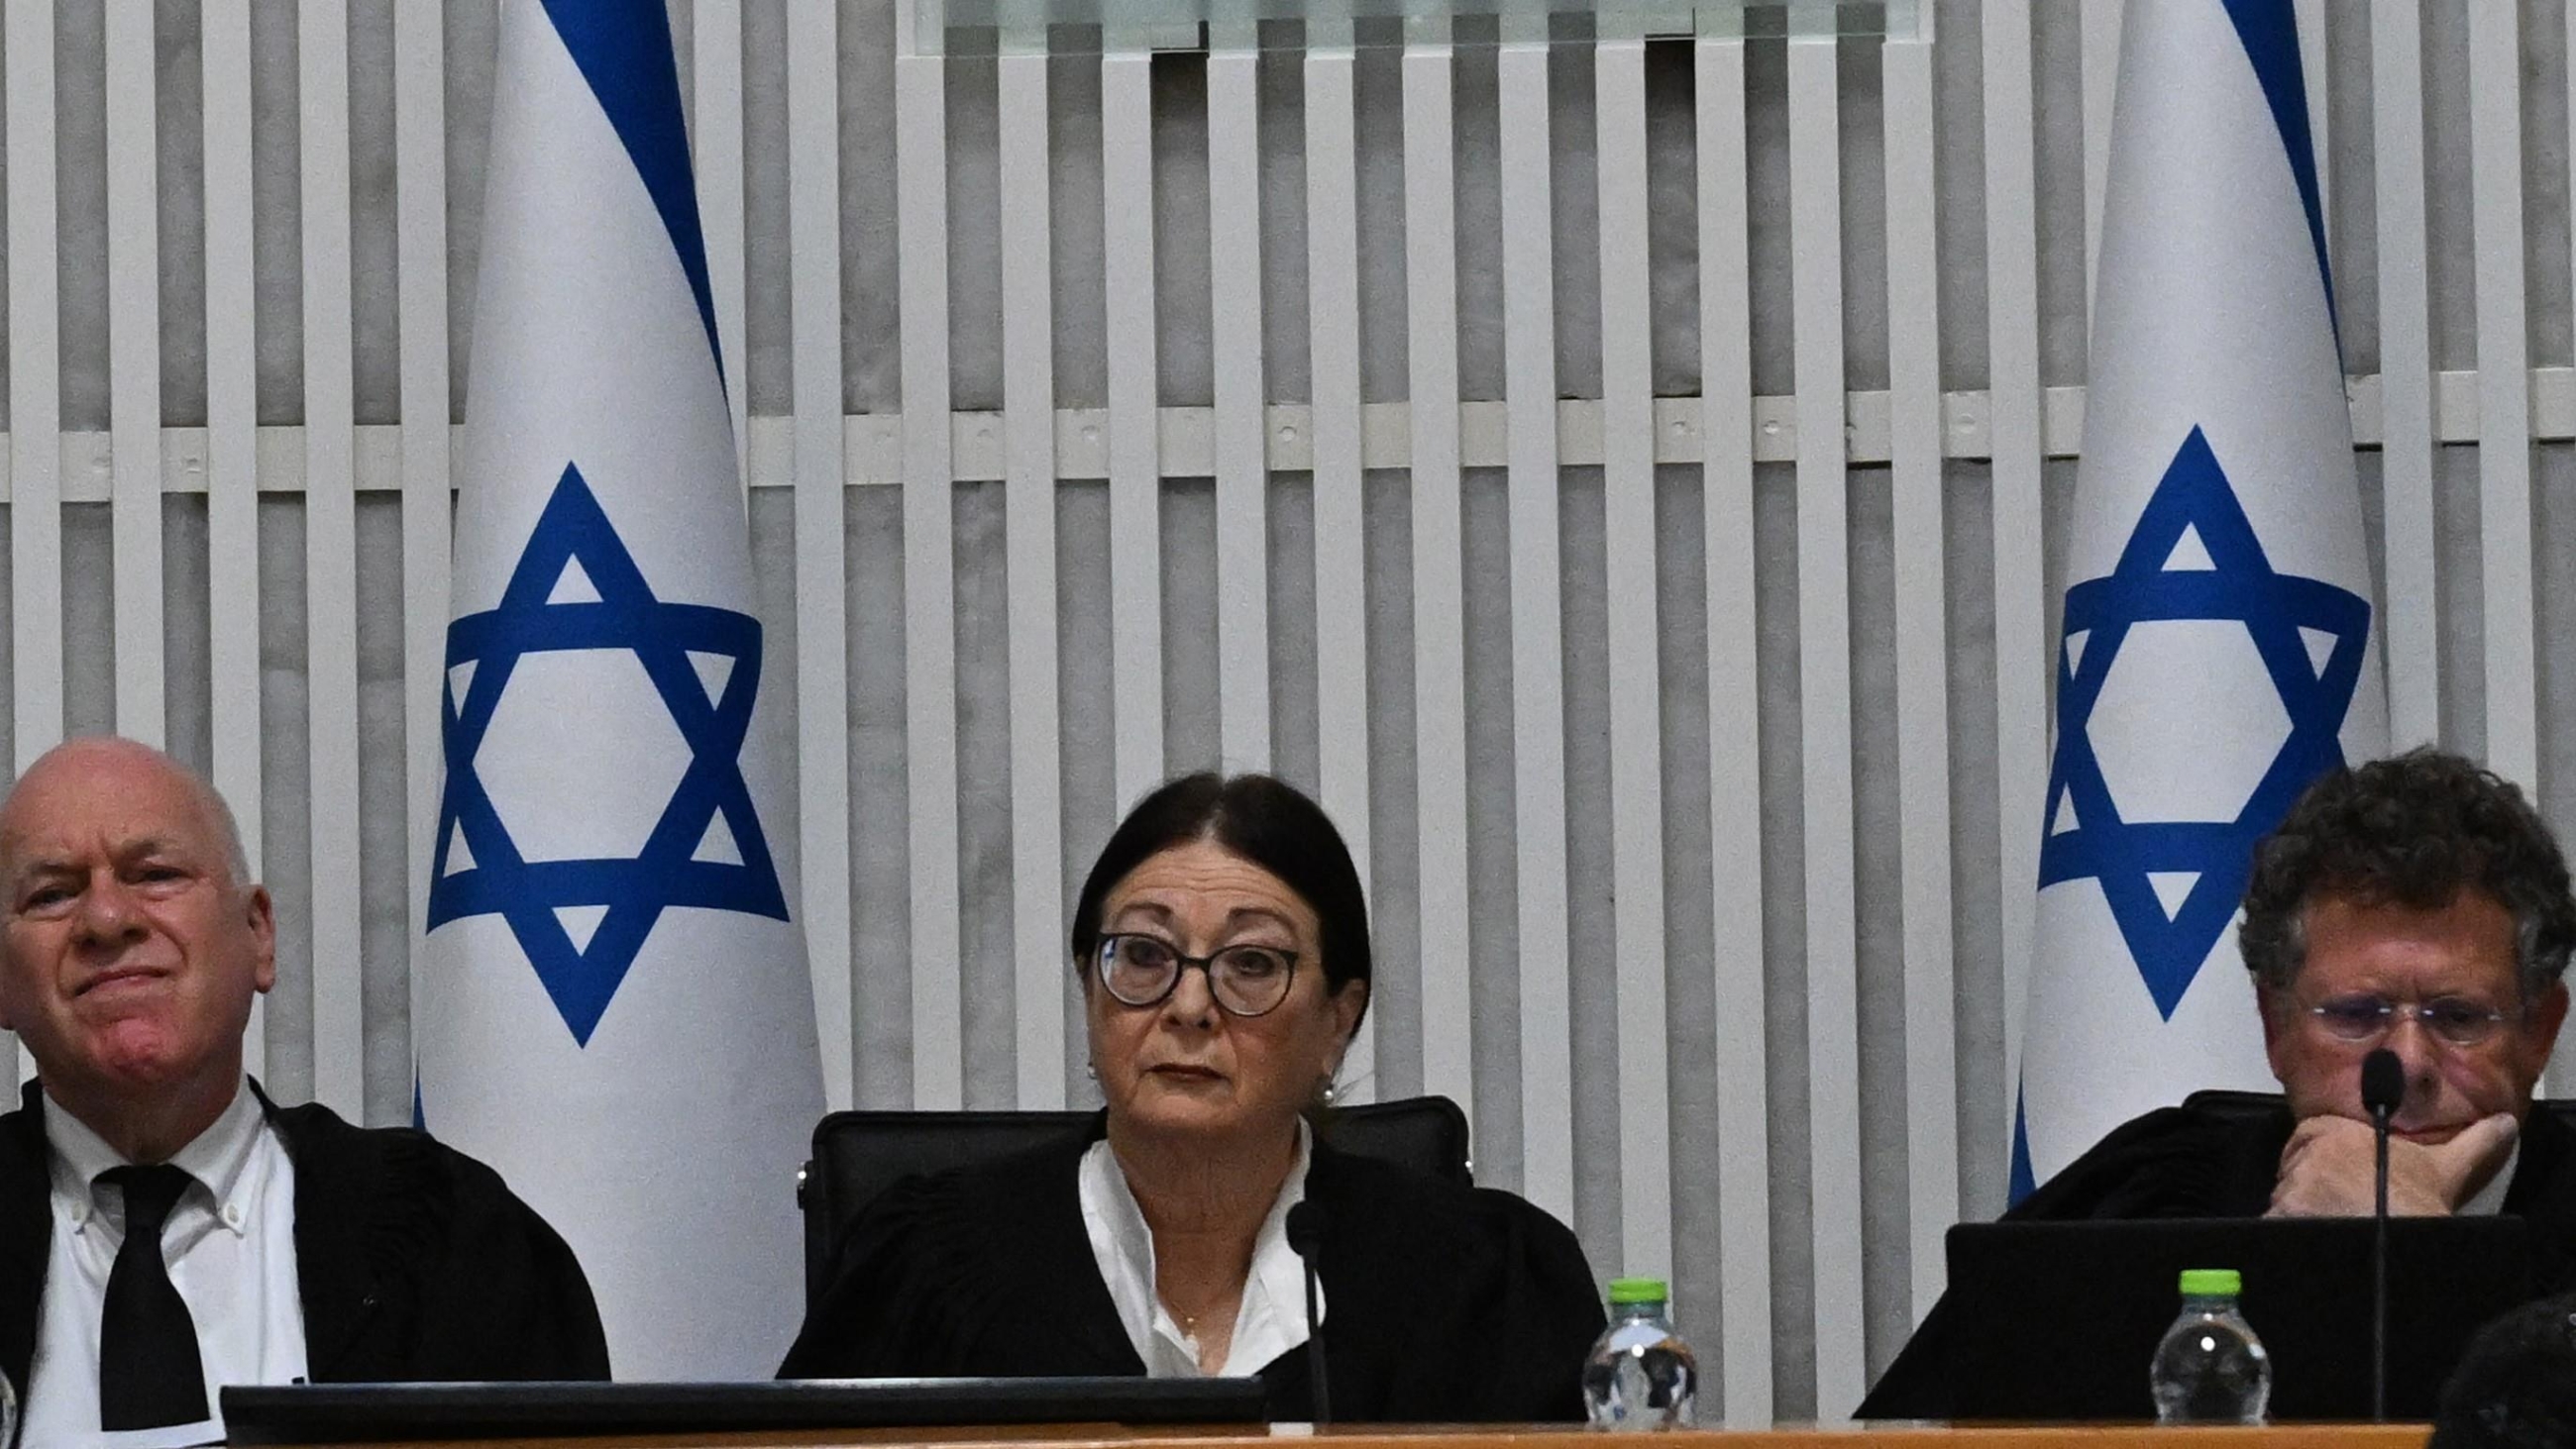 Chief Justice Esther Hayut during Tuesday's hearing in Jerusalem